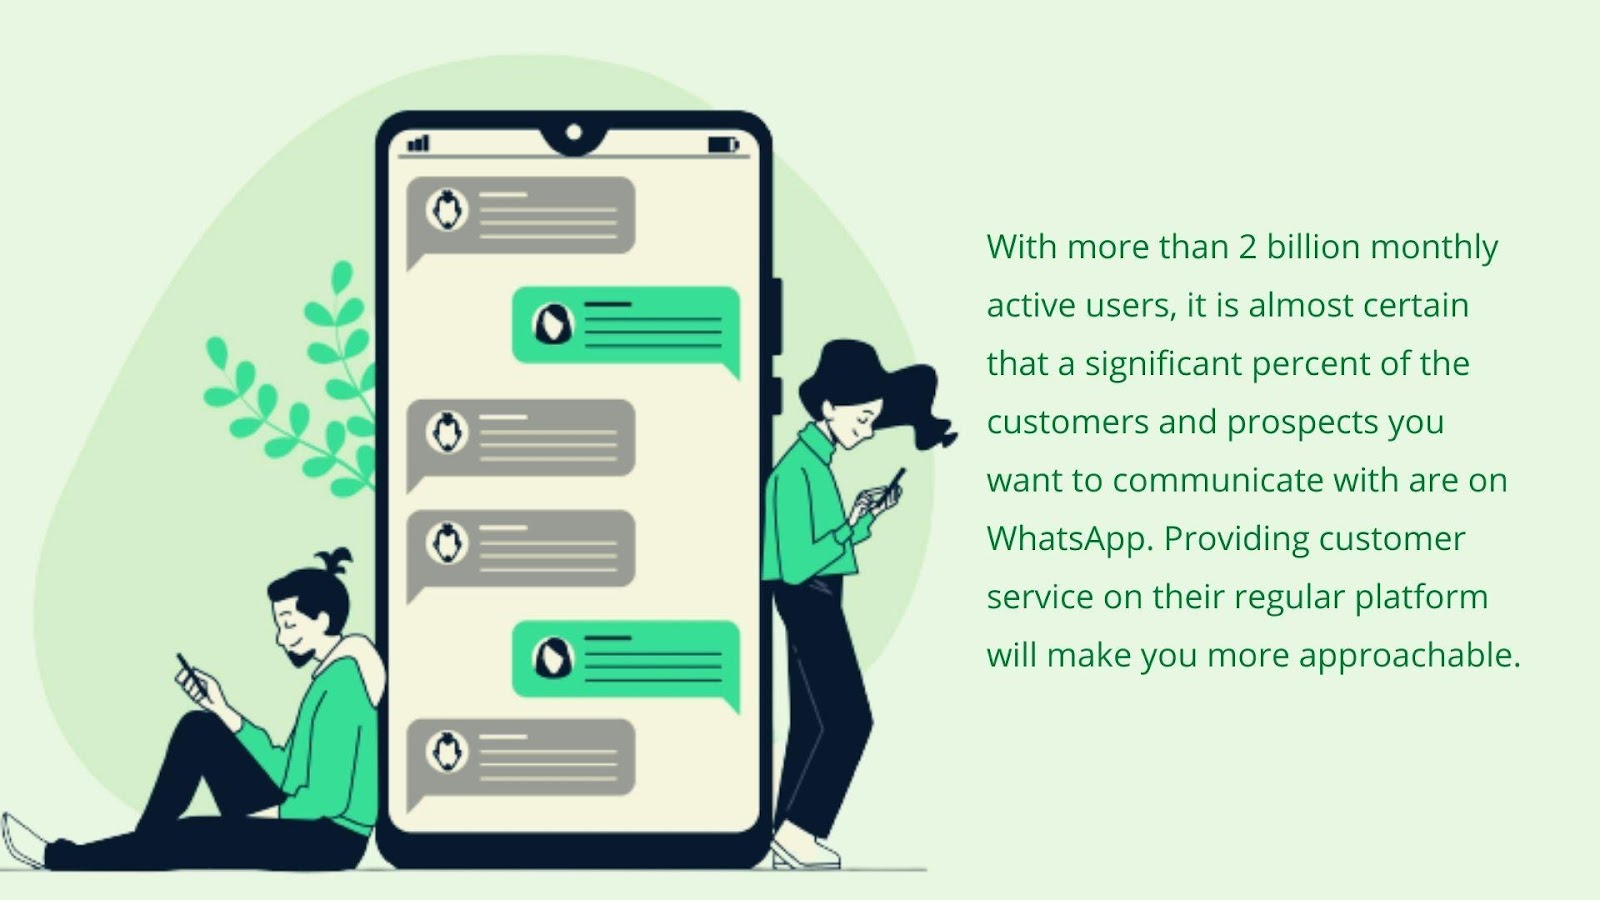 Illustration of two people messaging on WhatsApp, accompanied by the paragraph: “With more than 2 billion monthly active users, it is almost certain that a significant percentage of the customers and prospects you want to communicate with are on WhatsApp. Providing customer service on their regular platform will make you more approachable.”